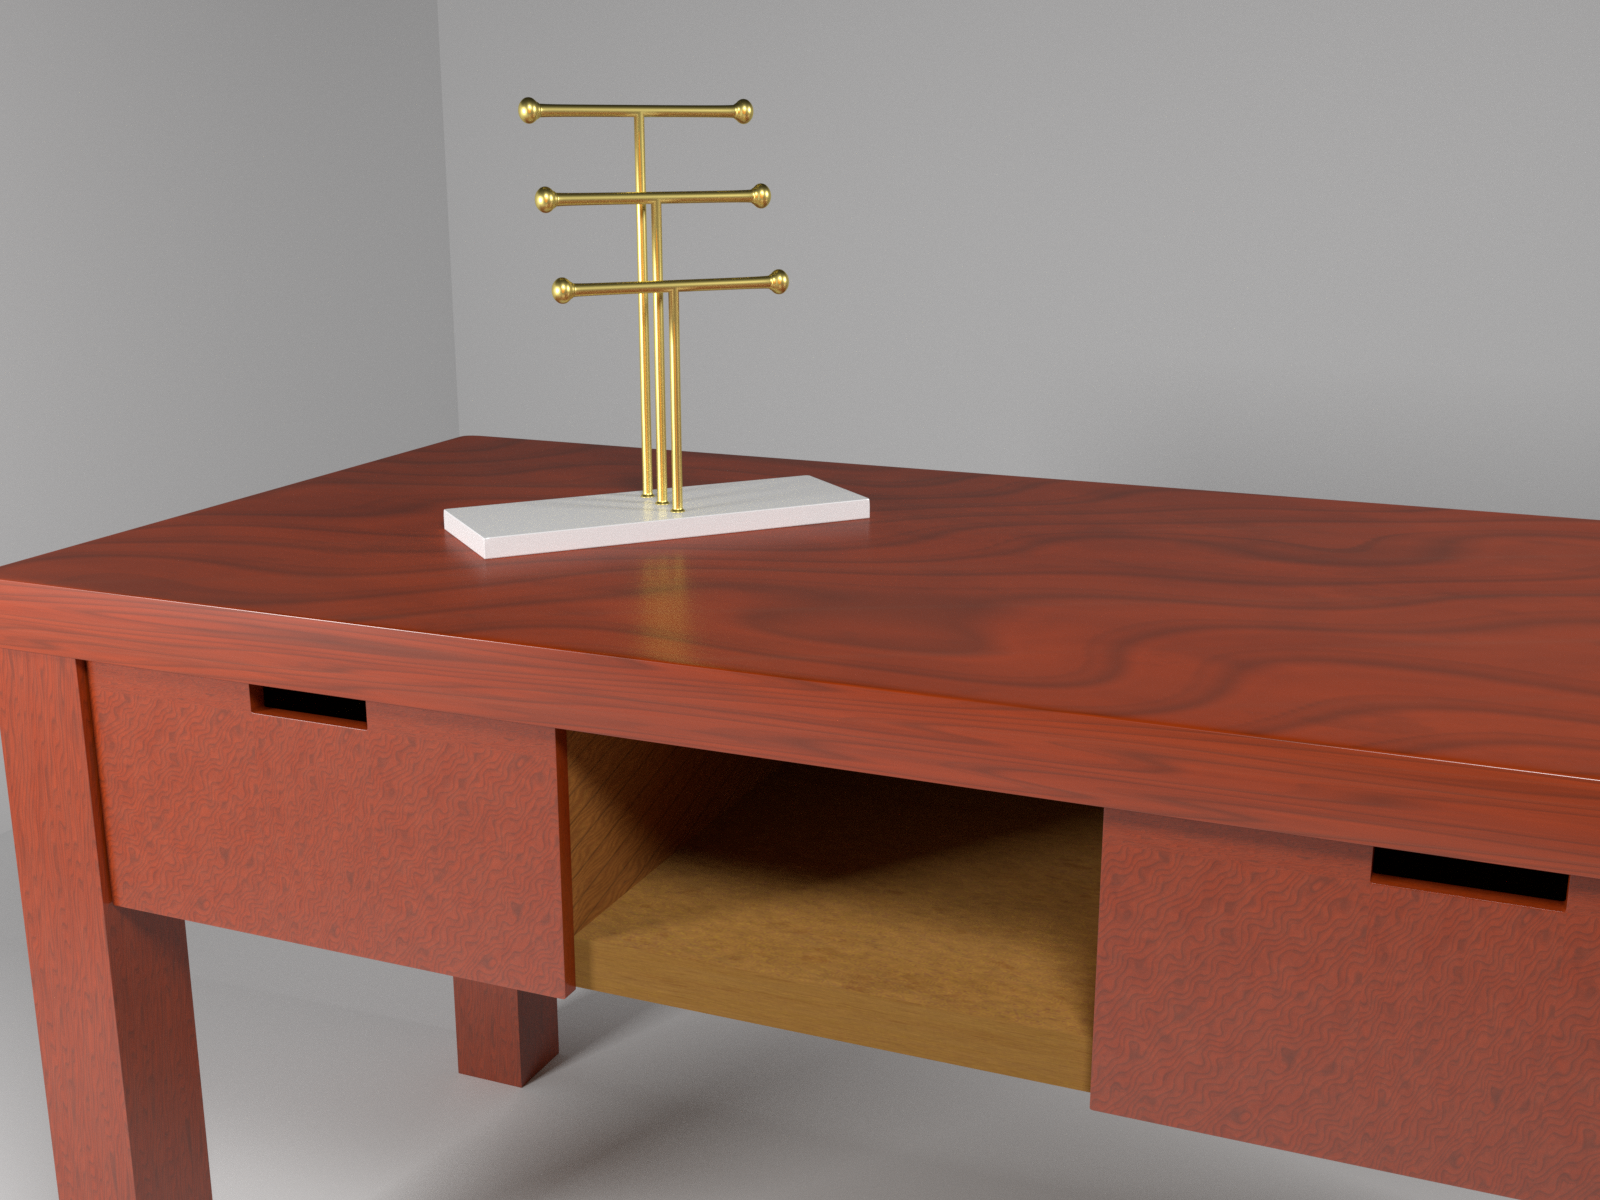 Golden jewelry holder on mahogany desk preview image 1